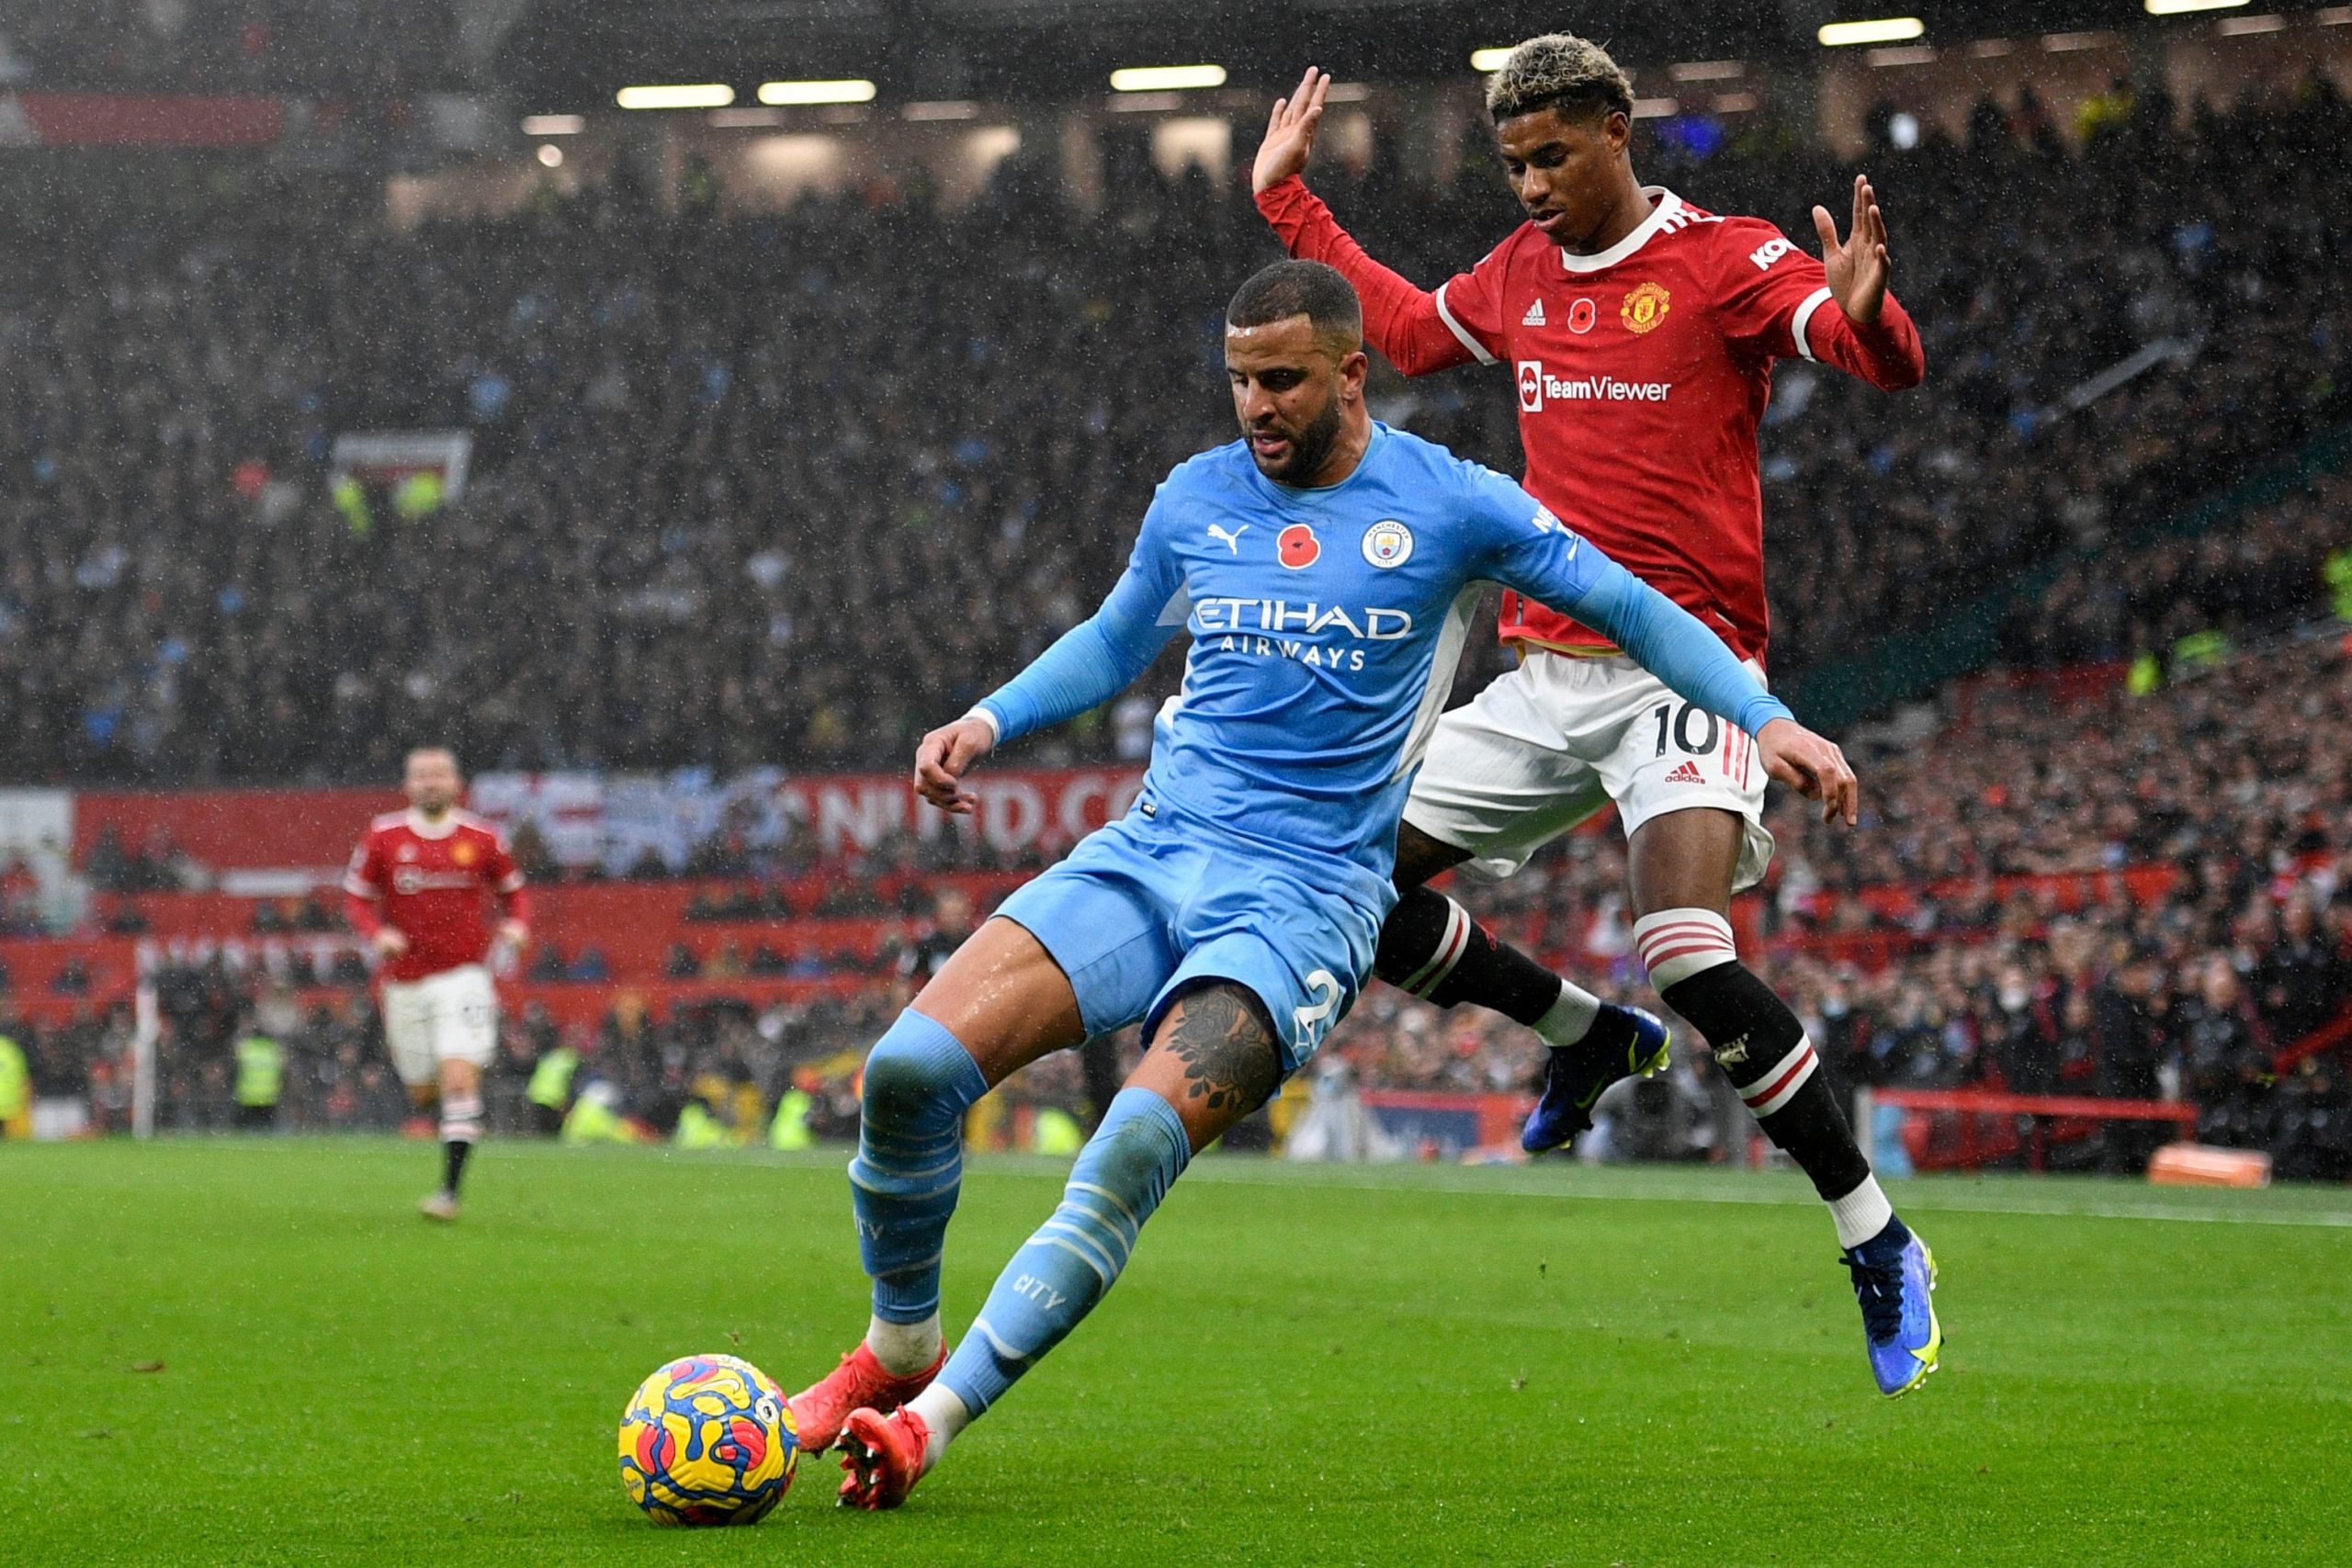 The Manchester derby is one of Europe's most fierce rivalries. (Photo by OLI SCARFF/AFP via Getty Images)